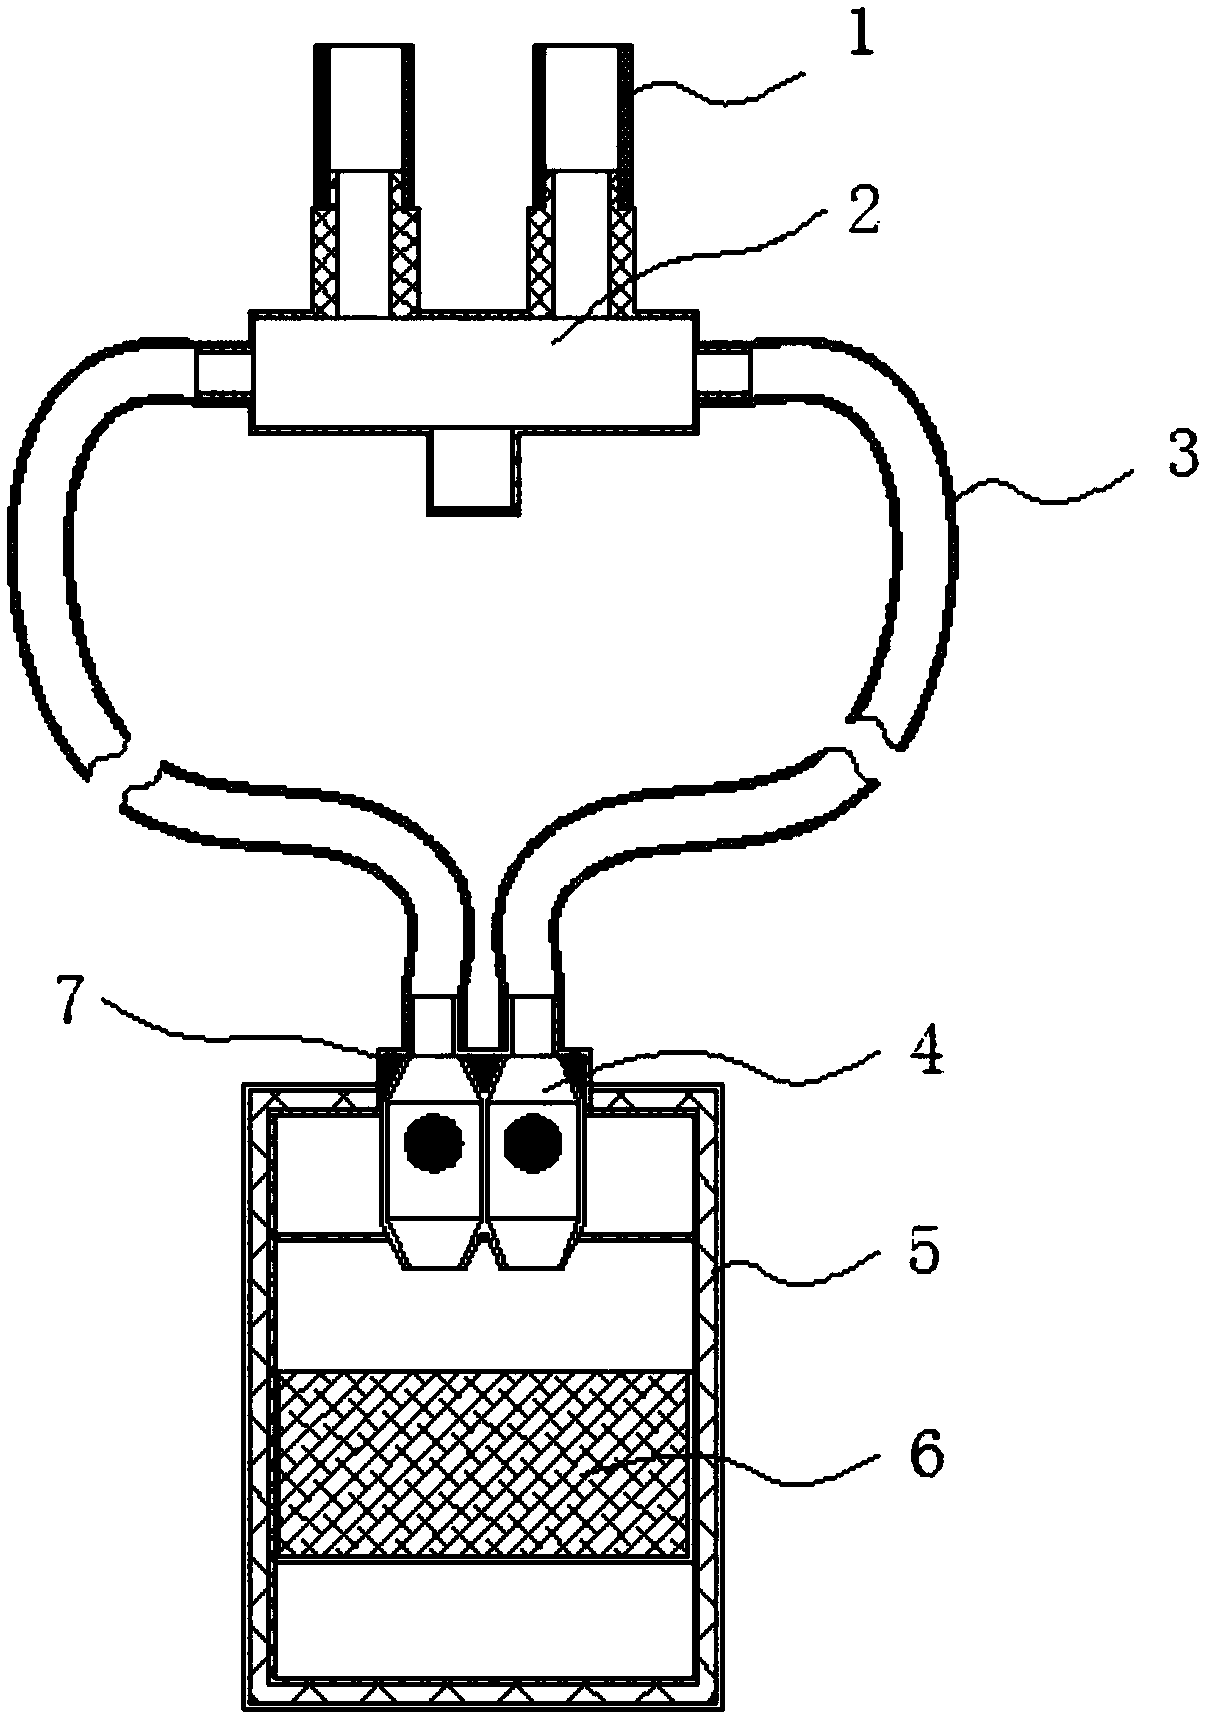 Respiratory health care medicine and matching device for use thereof